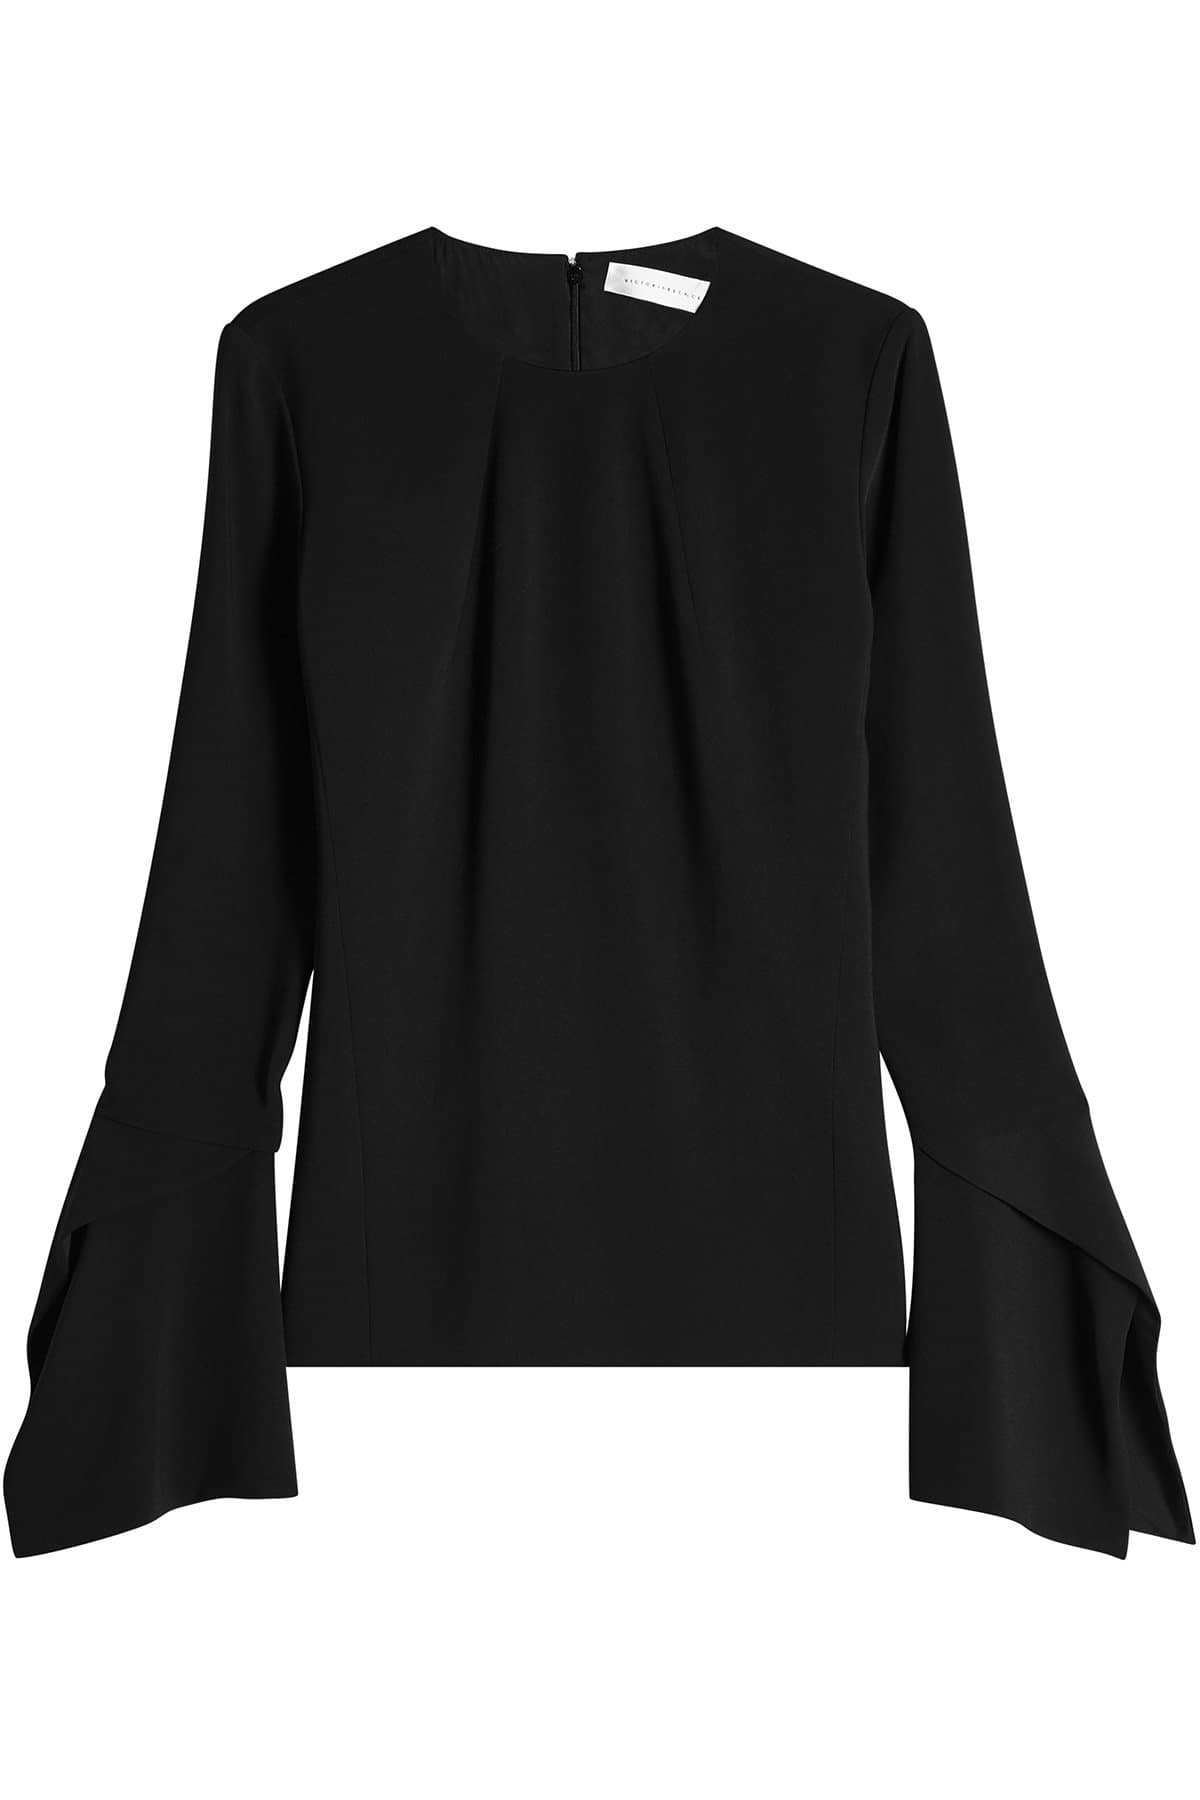 Victoria Beckham - Exaggerated Sleeves Top